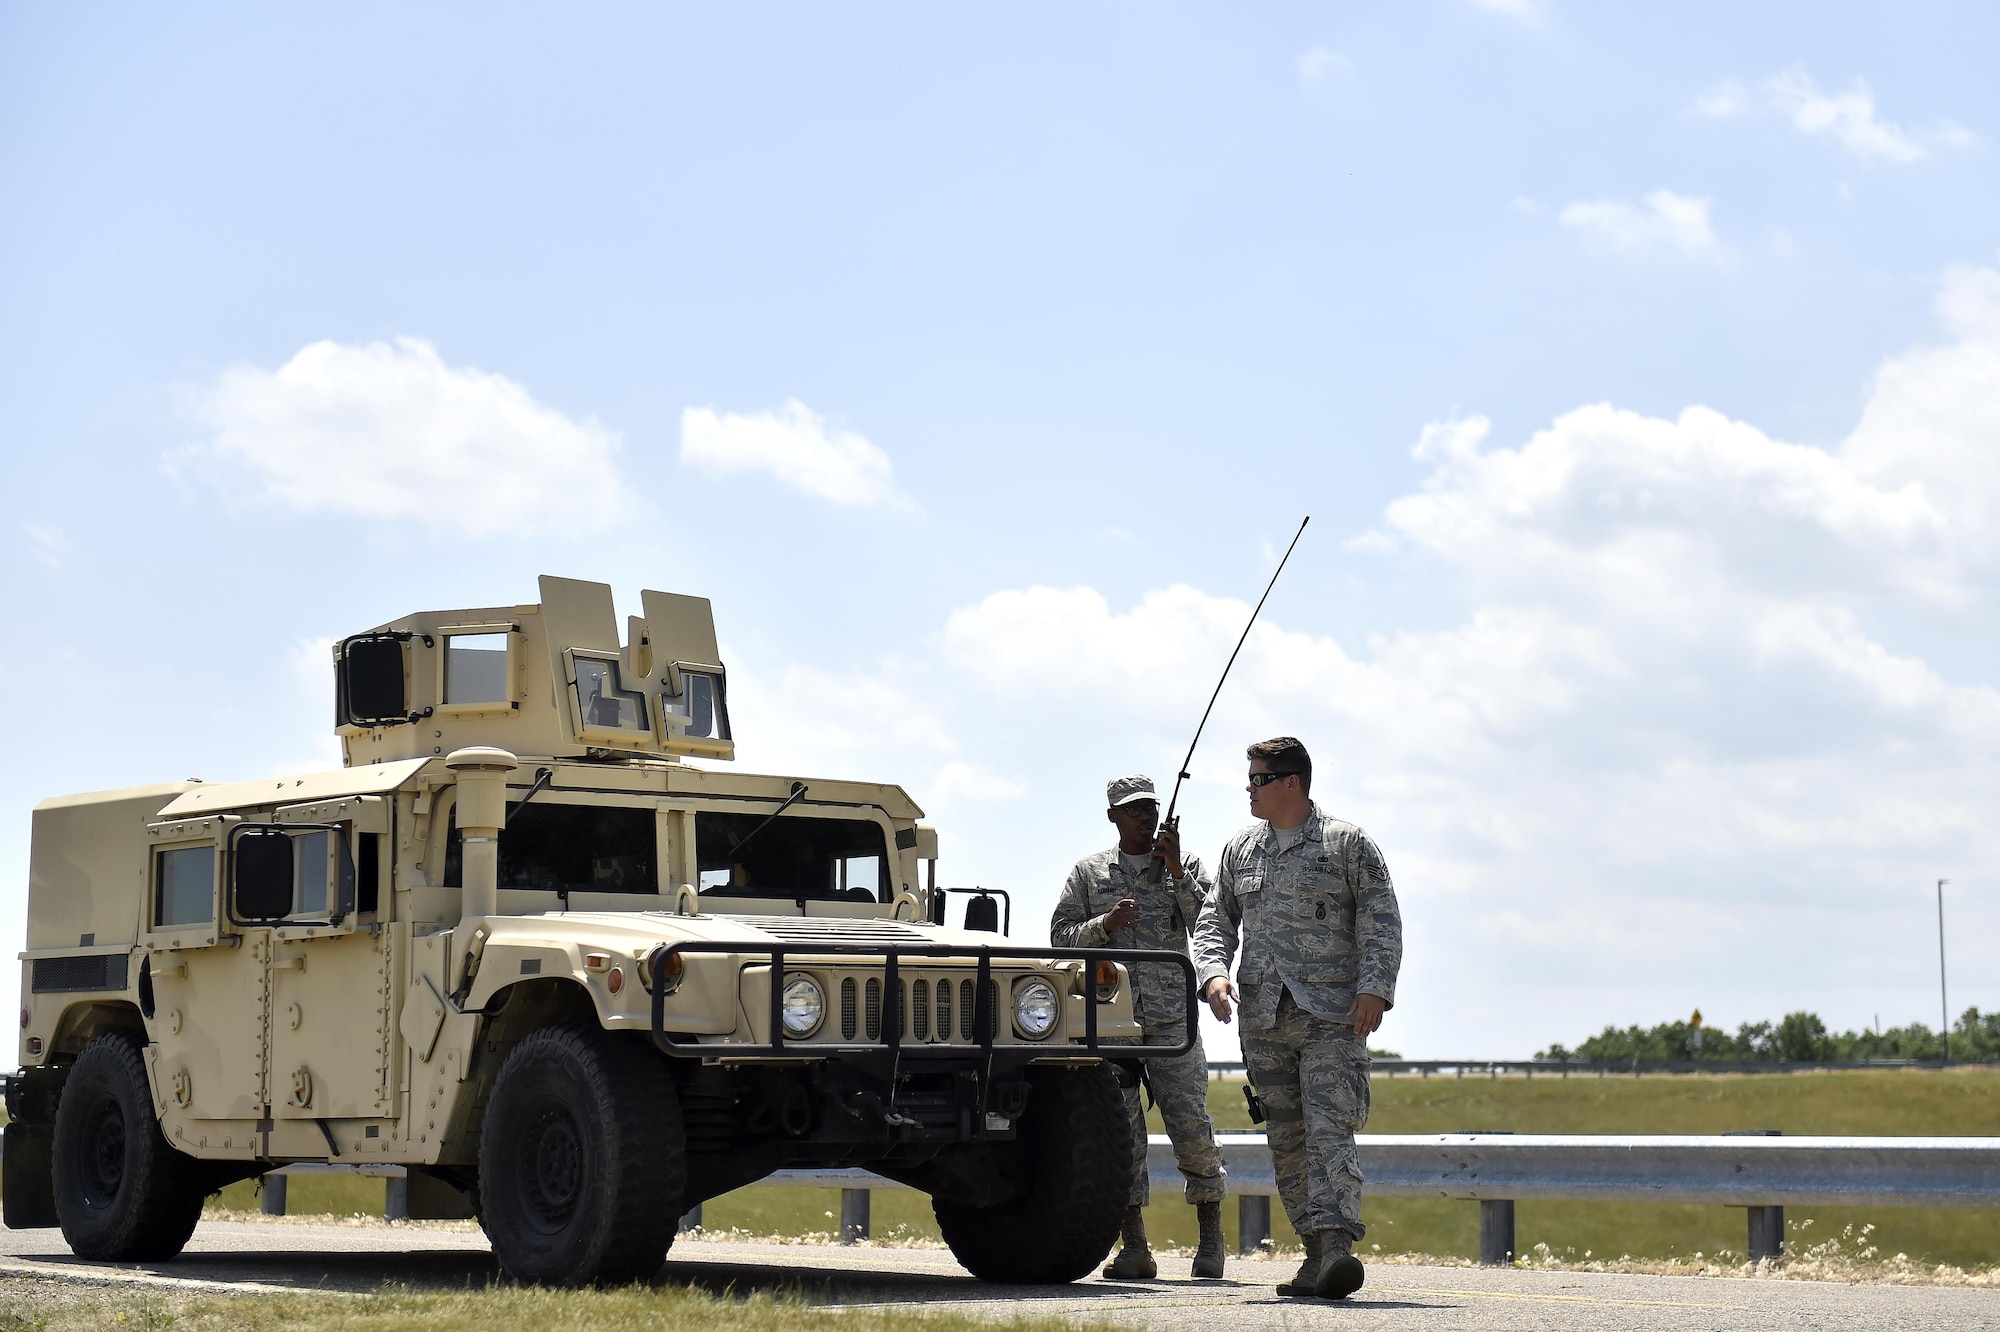 Airman 1st Class Calixto Mariano and Staff Sgt. Steven Armbright, 821st Contingency Response Group security forces, respond to a simulated accident during Exercise Turbo Distribution 17-02, June 9, 2017, at Battle Creek Air National Guard Base, Mich.  Turbo Distribution is used to evaluate mobility operations and expeditionary combat support. Unlike traditional, simulation based exercises, TD provides a dynamic venue with scenarios designed to challenge participants executing complex operations in a deployed environment.  (U.S. Photo by Tech. Sgt. Liliana Moreno/Released)